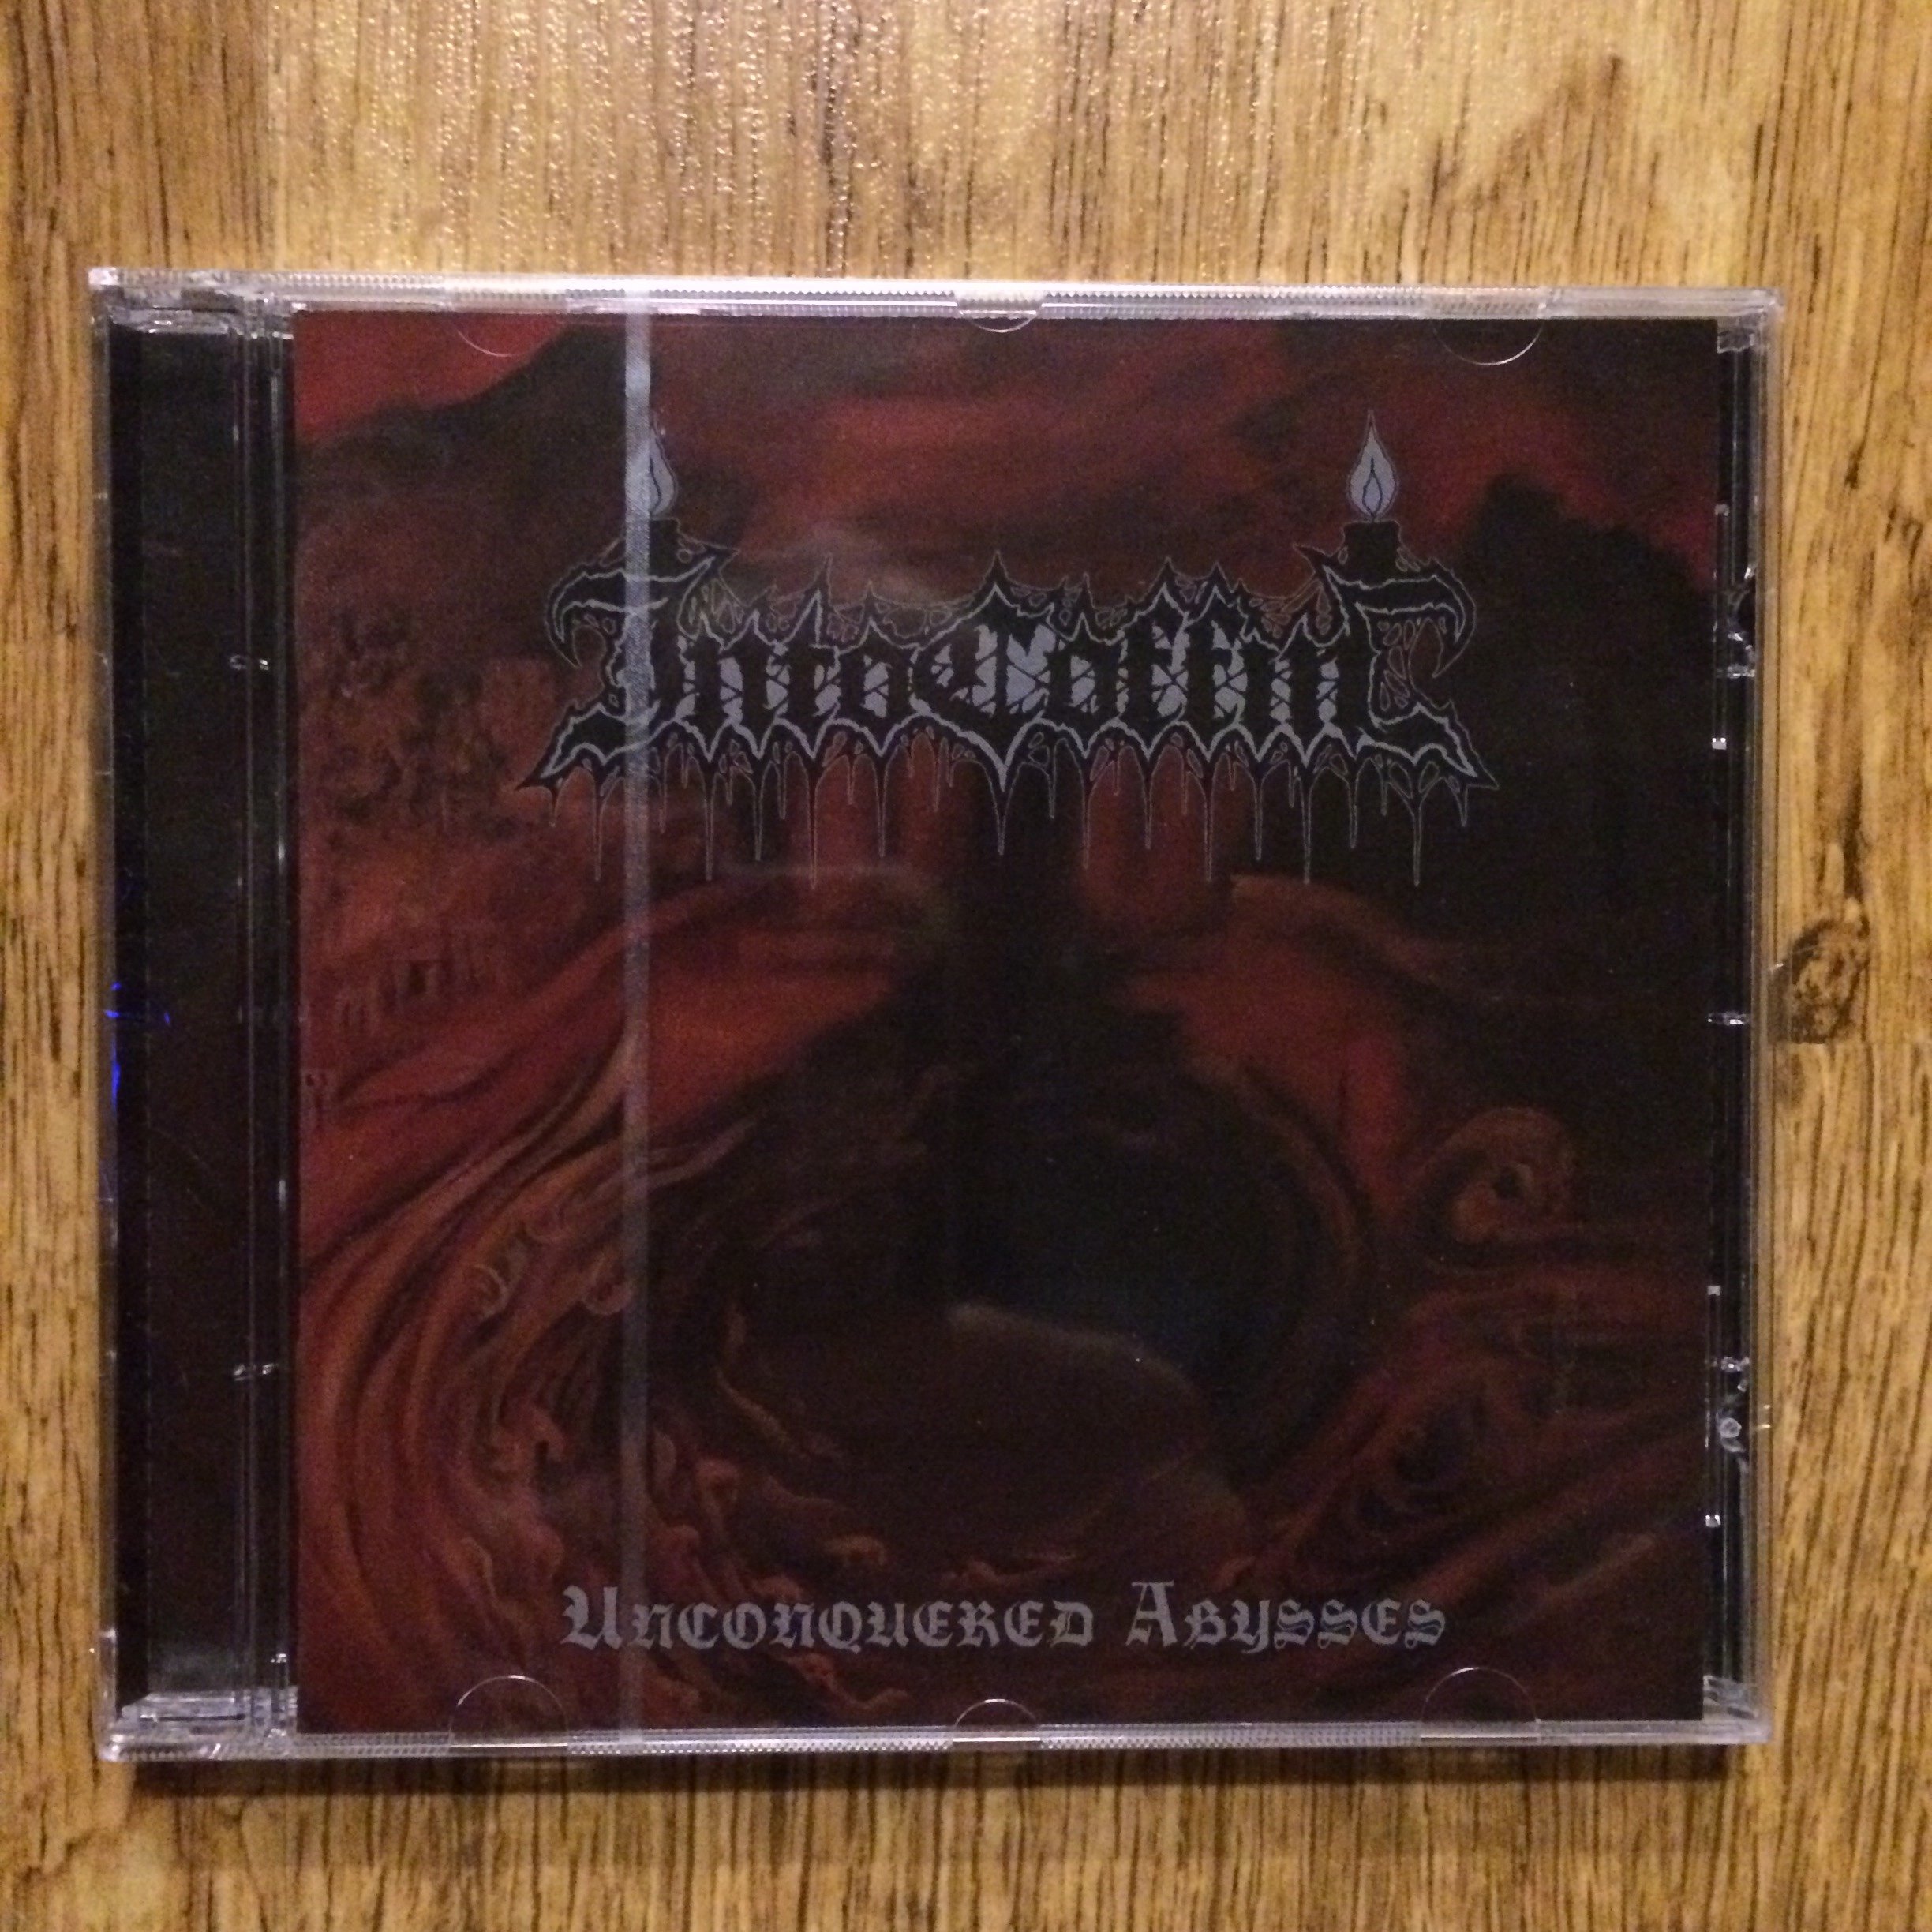 Photo of the Into Coffin - "Unconquered Abysses" CD